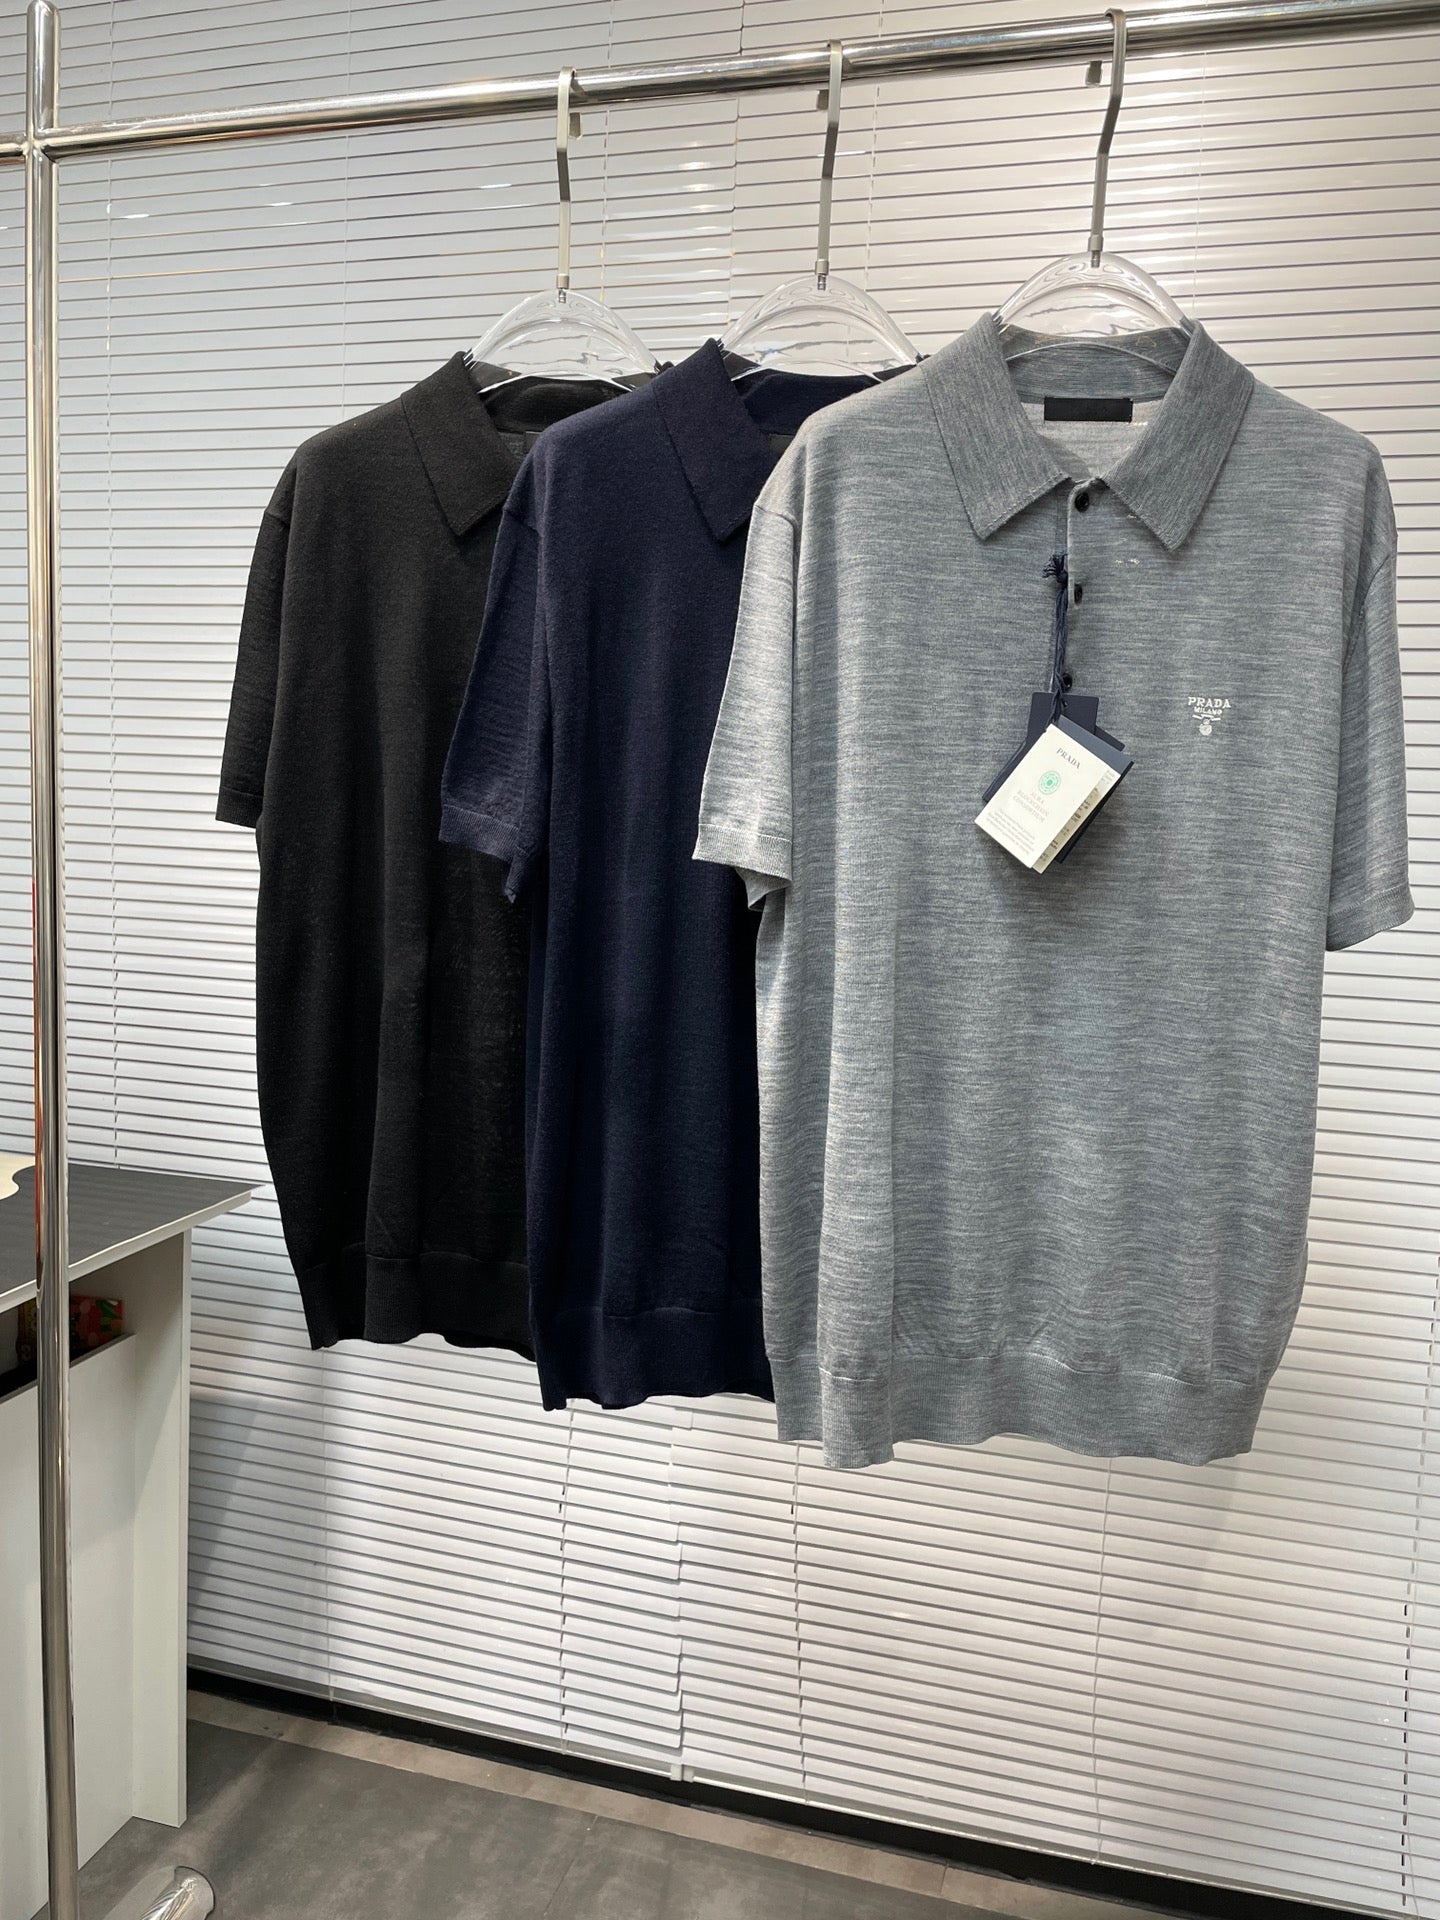 Black,Grey and Blue Polo